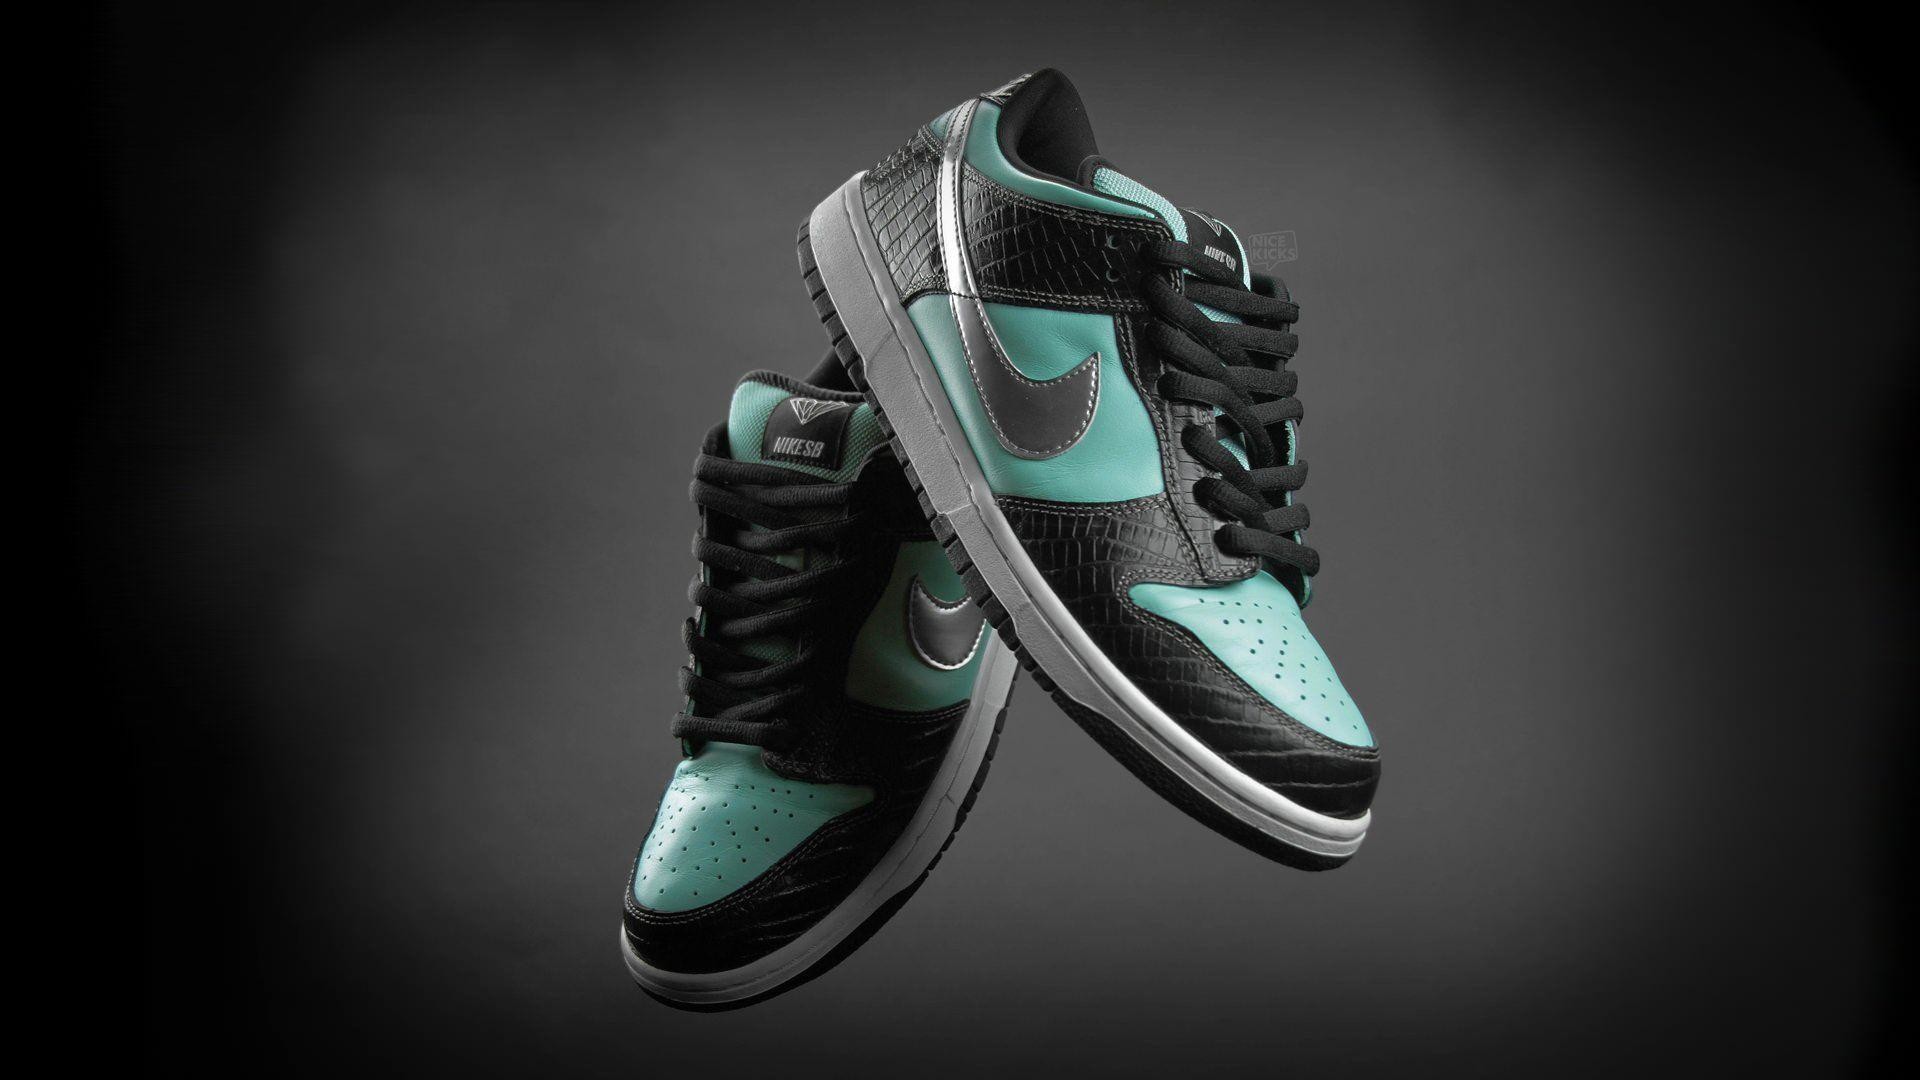 Nike Sb Wallpapers 75 Images